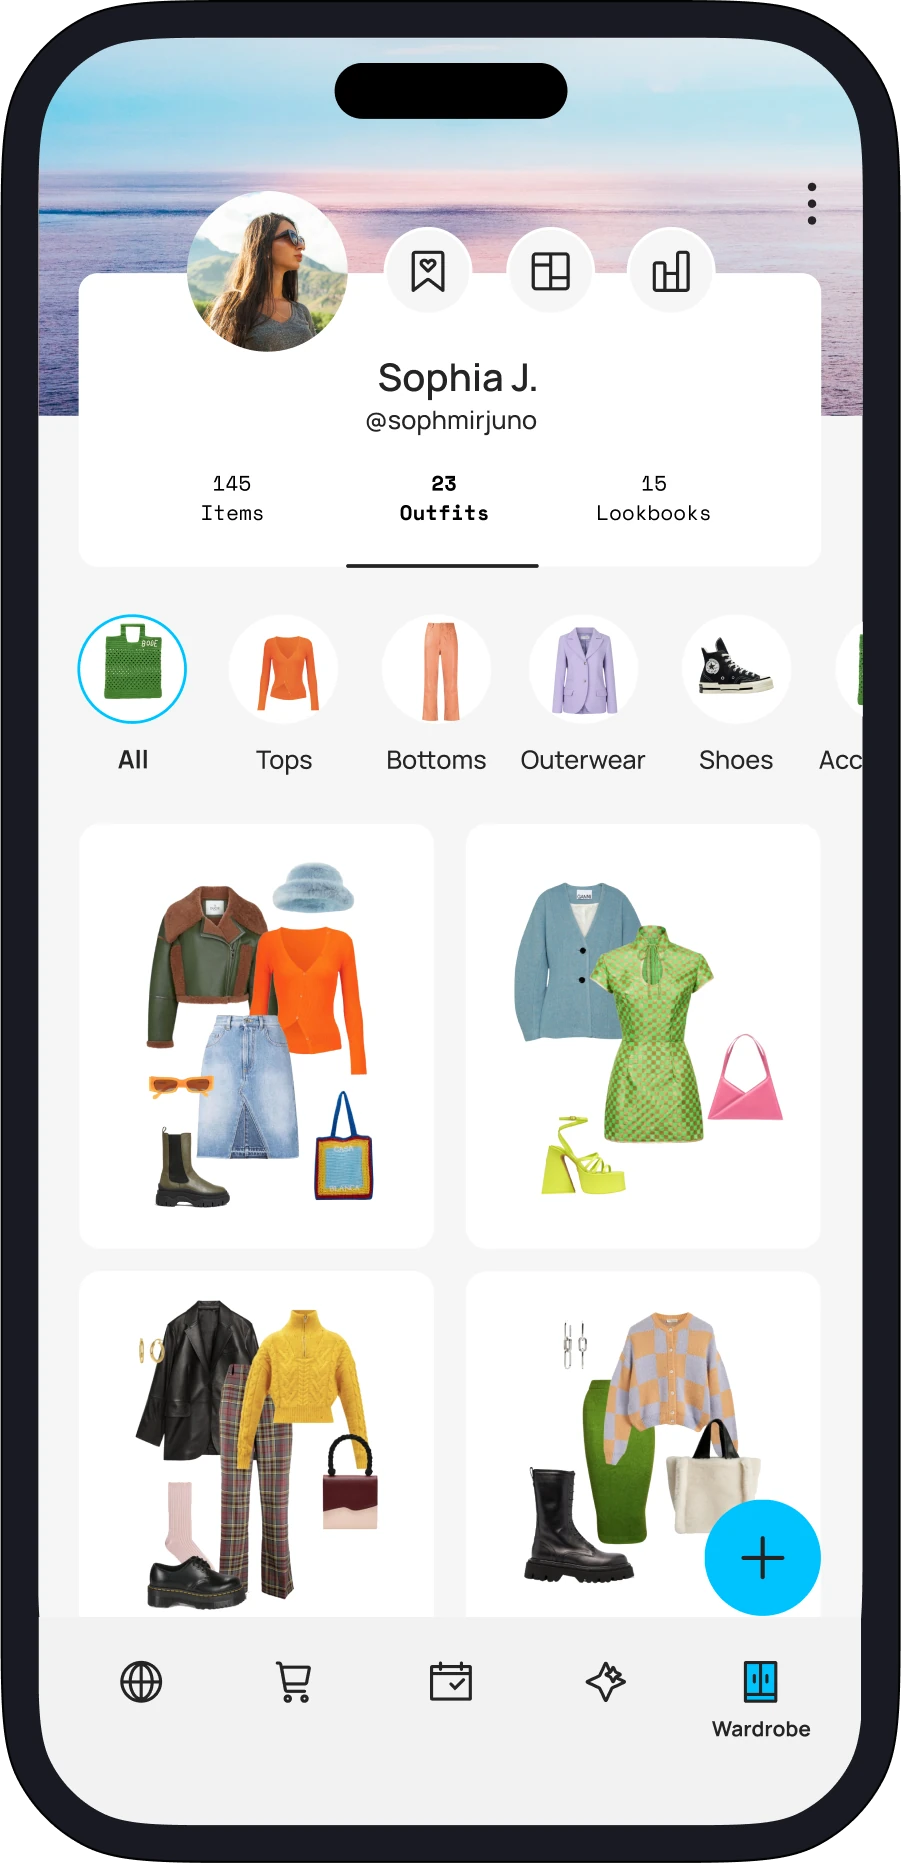 Create unlimited outfits and lookbooks